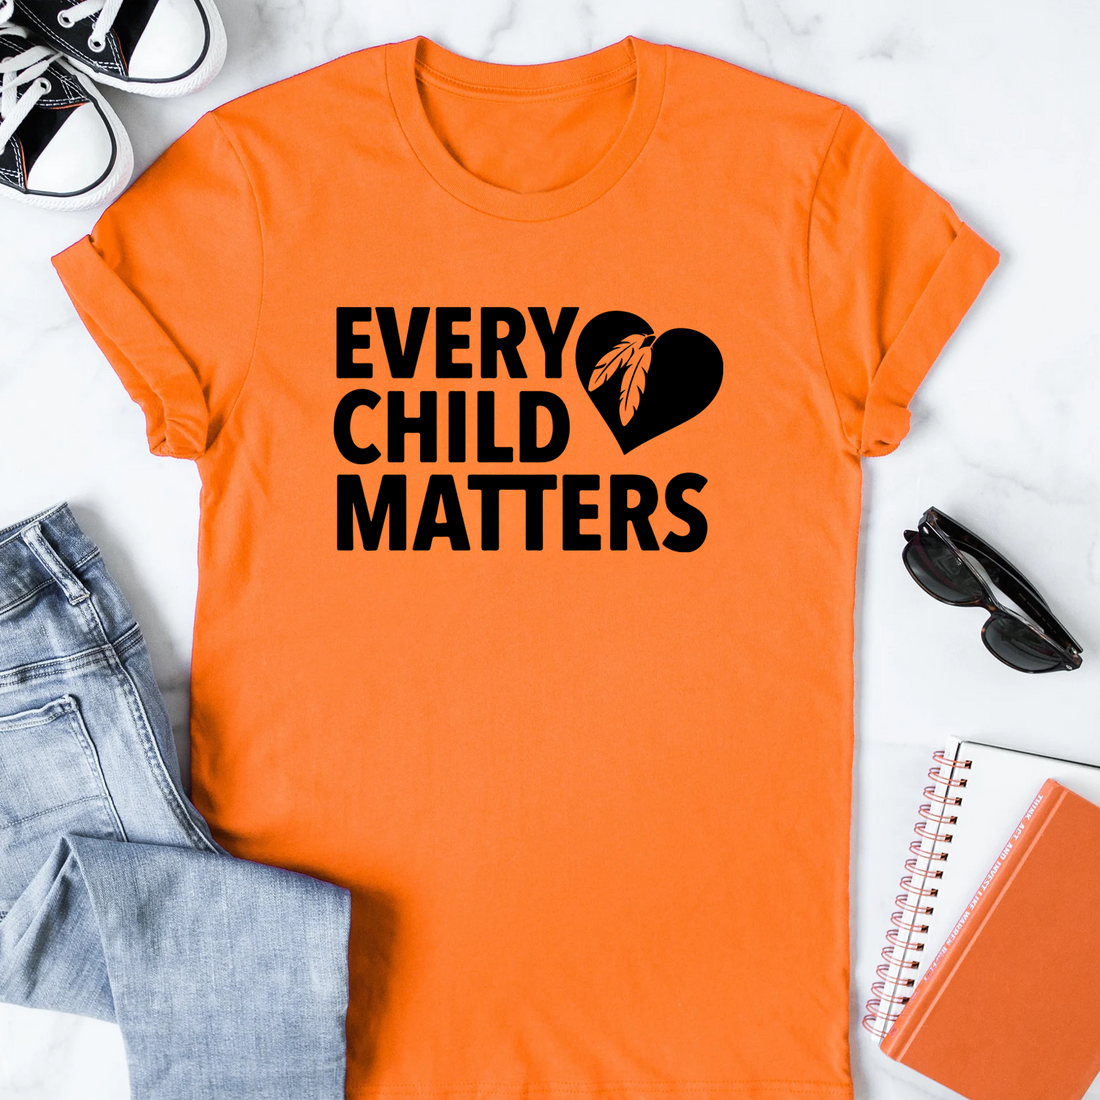 Every Child Matters Screen Print Transfer